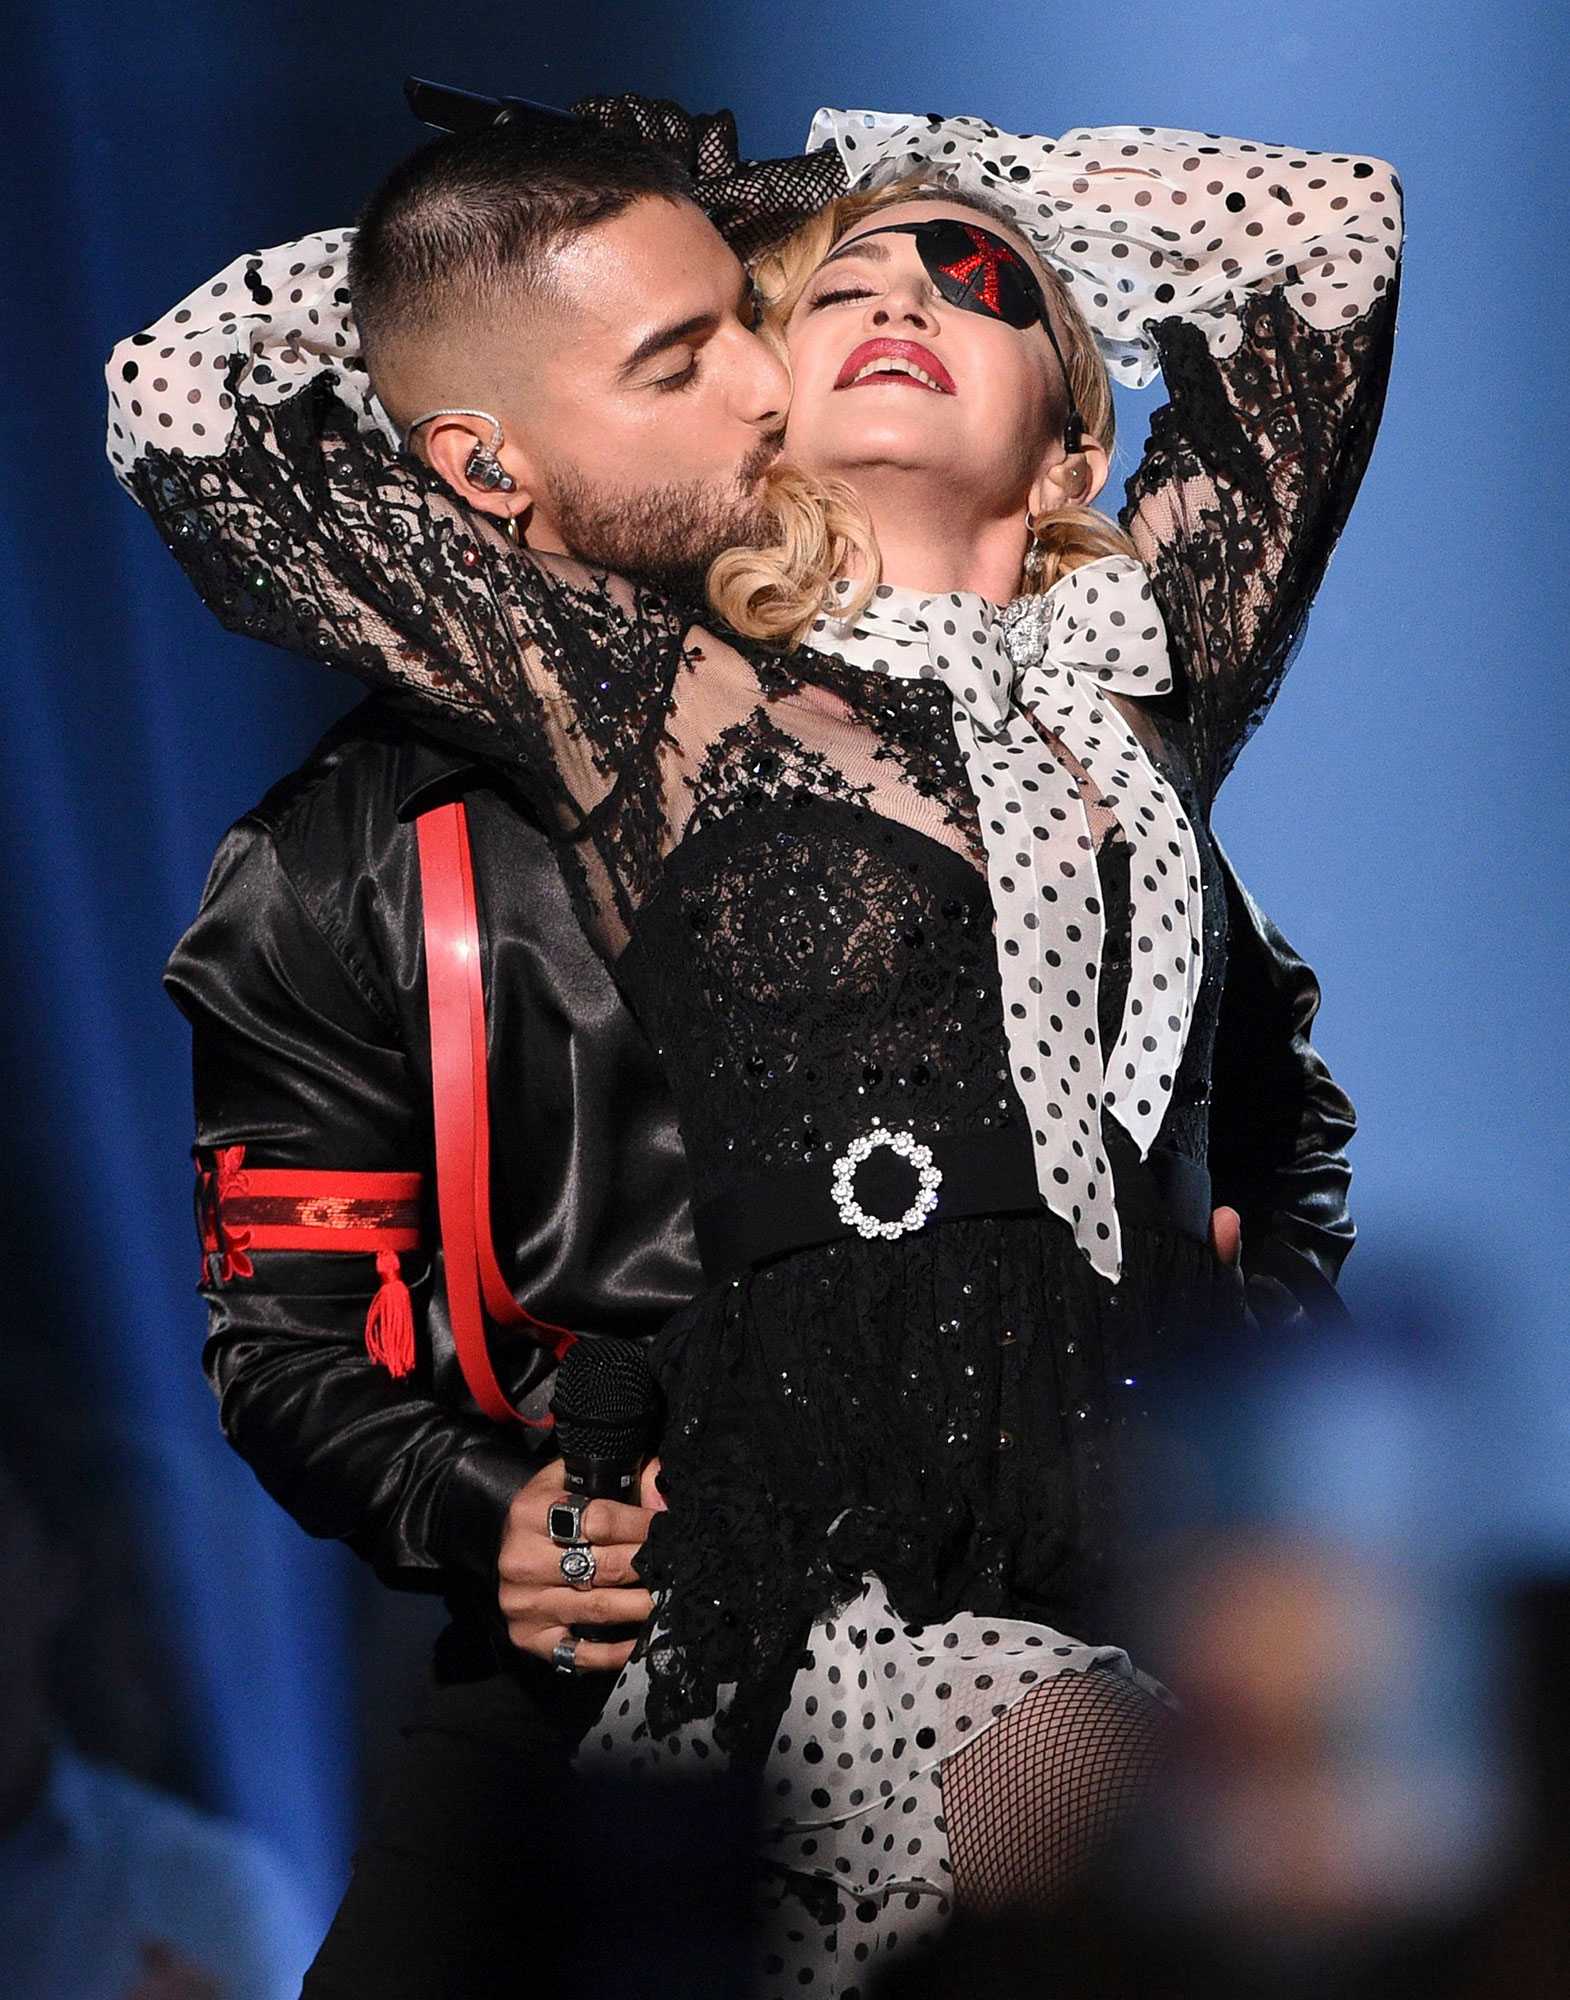 Mandatory Credit: Photo by Chris Pizzello/Invision/AP/REX/Shutterstock (10225918bc) Maluma,Madonna. Maluma, left, kisses Madonna as they perform "Medellin" at the Billboard Music Awards, at the MGM Grand Garden Arena in Las Vegas 2019 Billboard Music Awards - Show, Las Vegas, USA - 01 May 2019